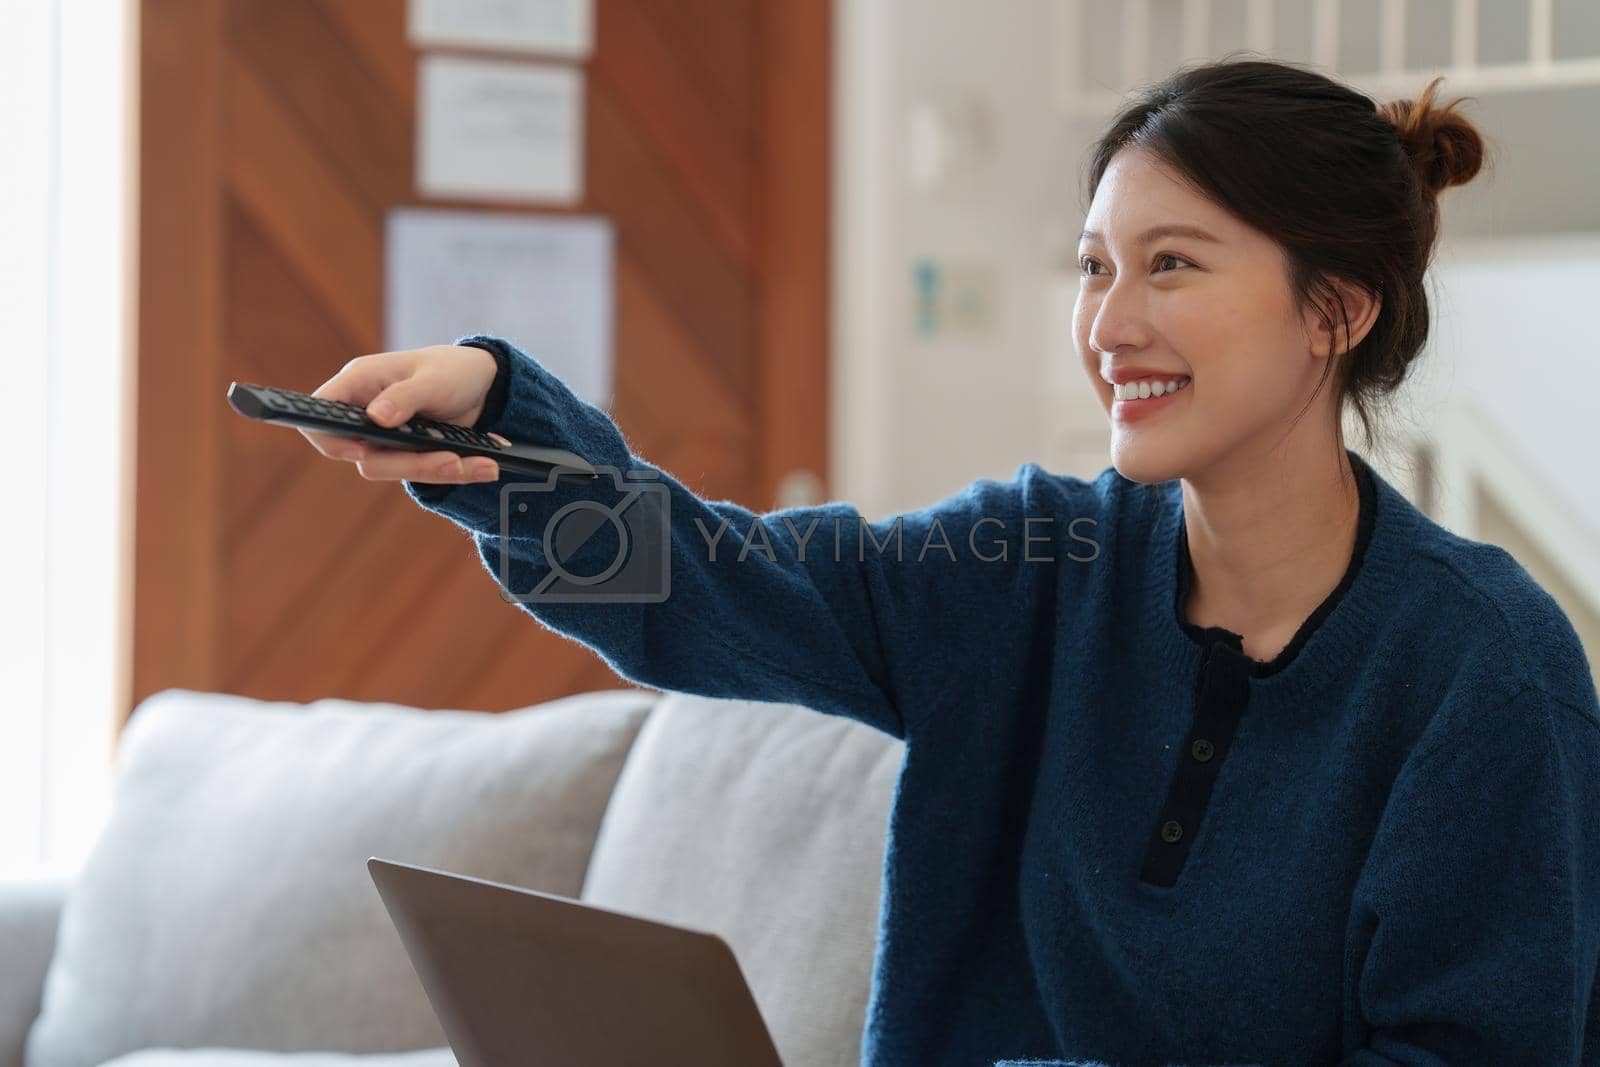 Royalty free image of Excited young Asian woman watching television programs with remote controller. Lifestyle and spends leisure at home. by itchaznong